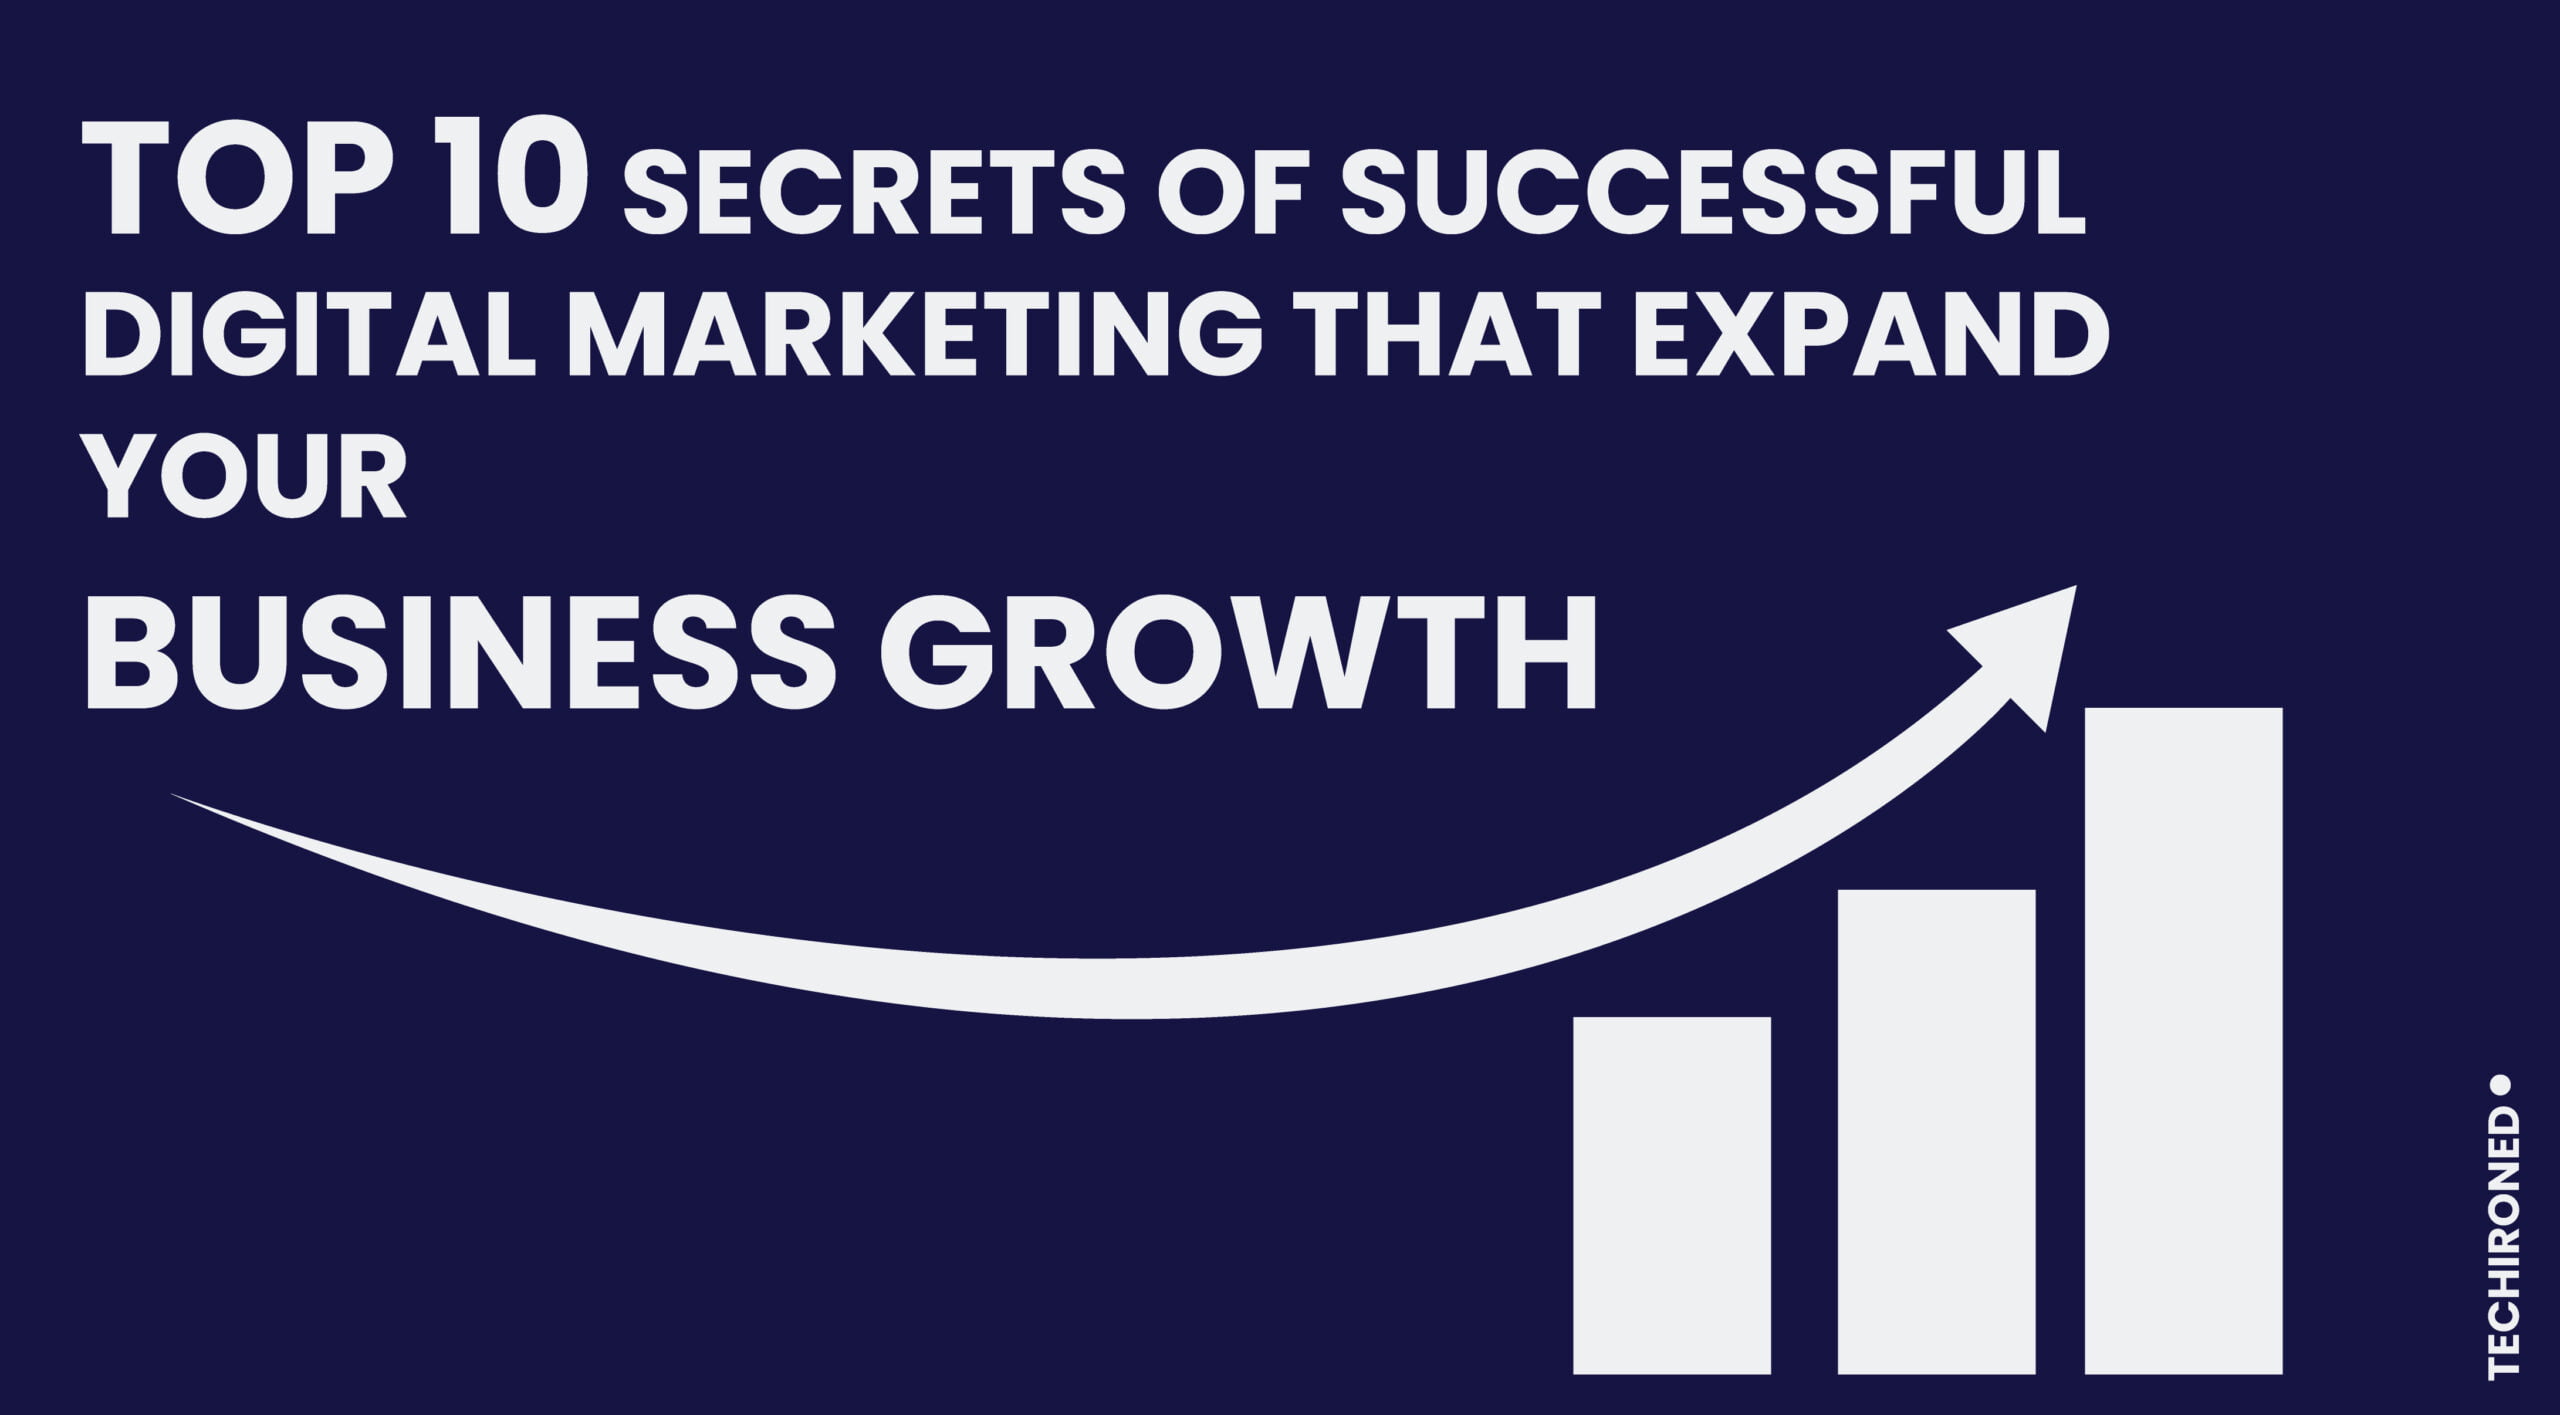 Secrets-of-Successful-Digital-Marketing-that-Expand-Your-Business-Growth